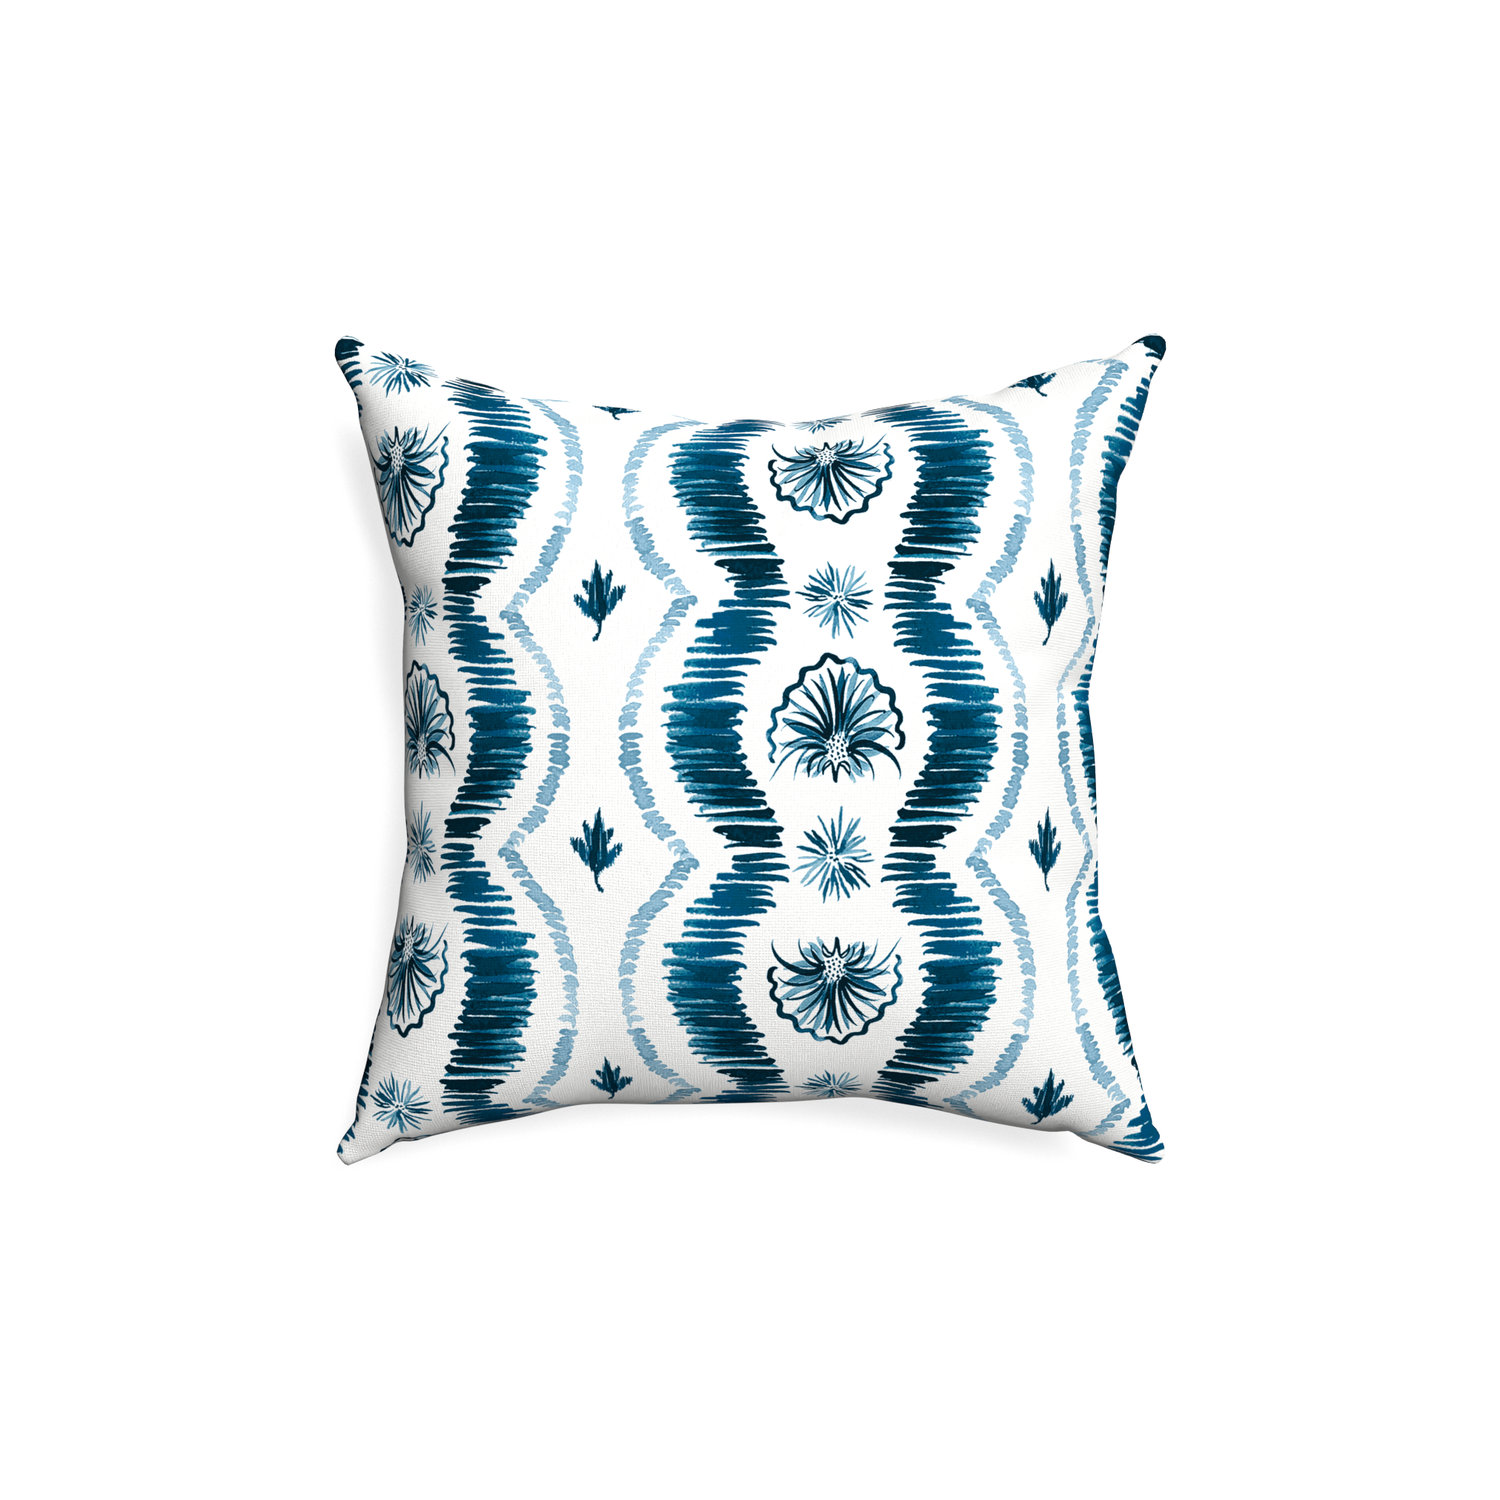 18-square alice custom blue ikatpillow with none on white background